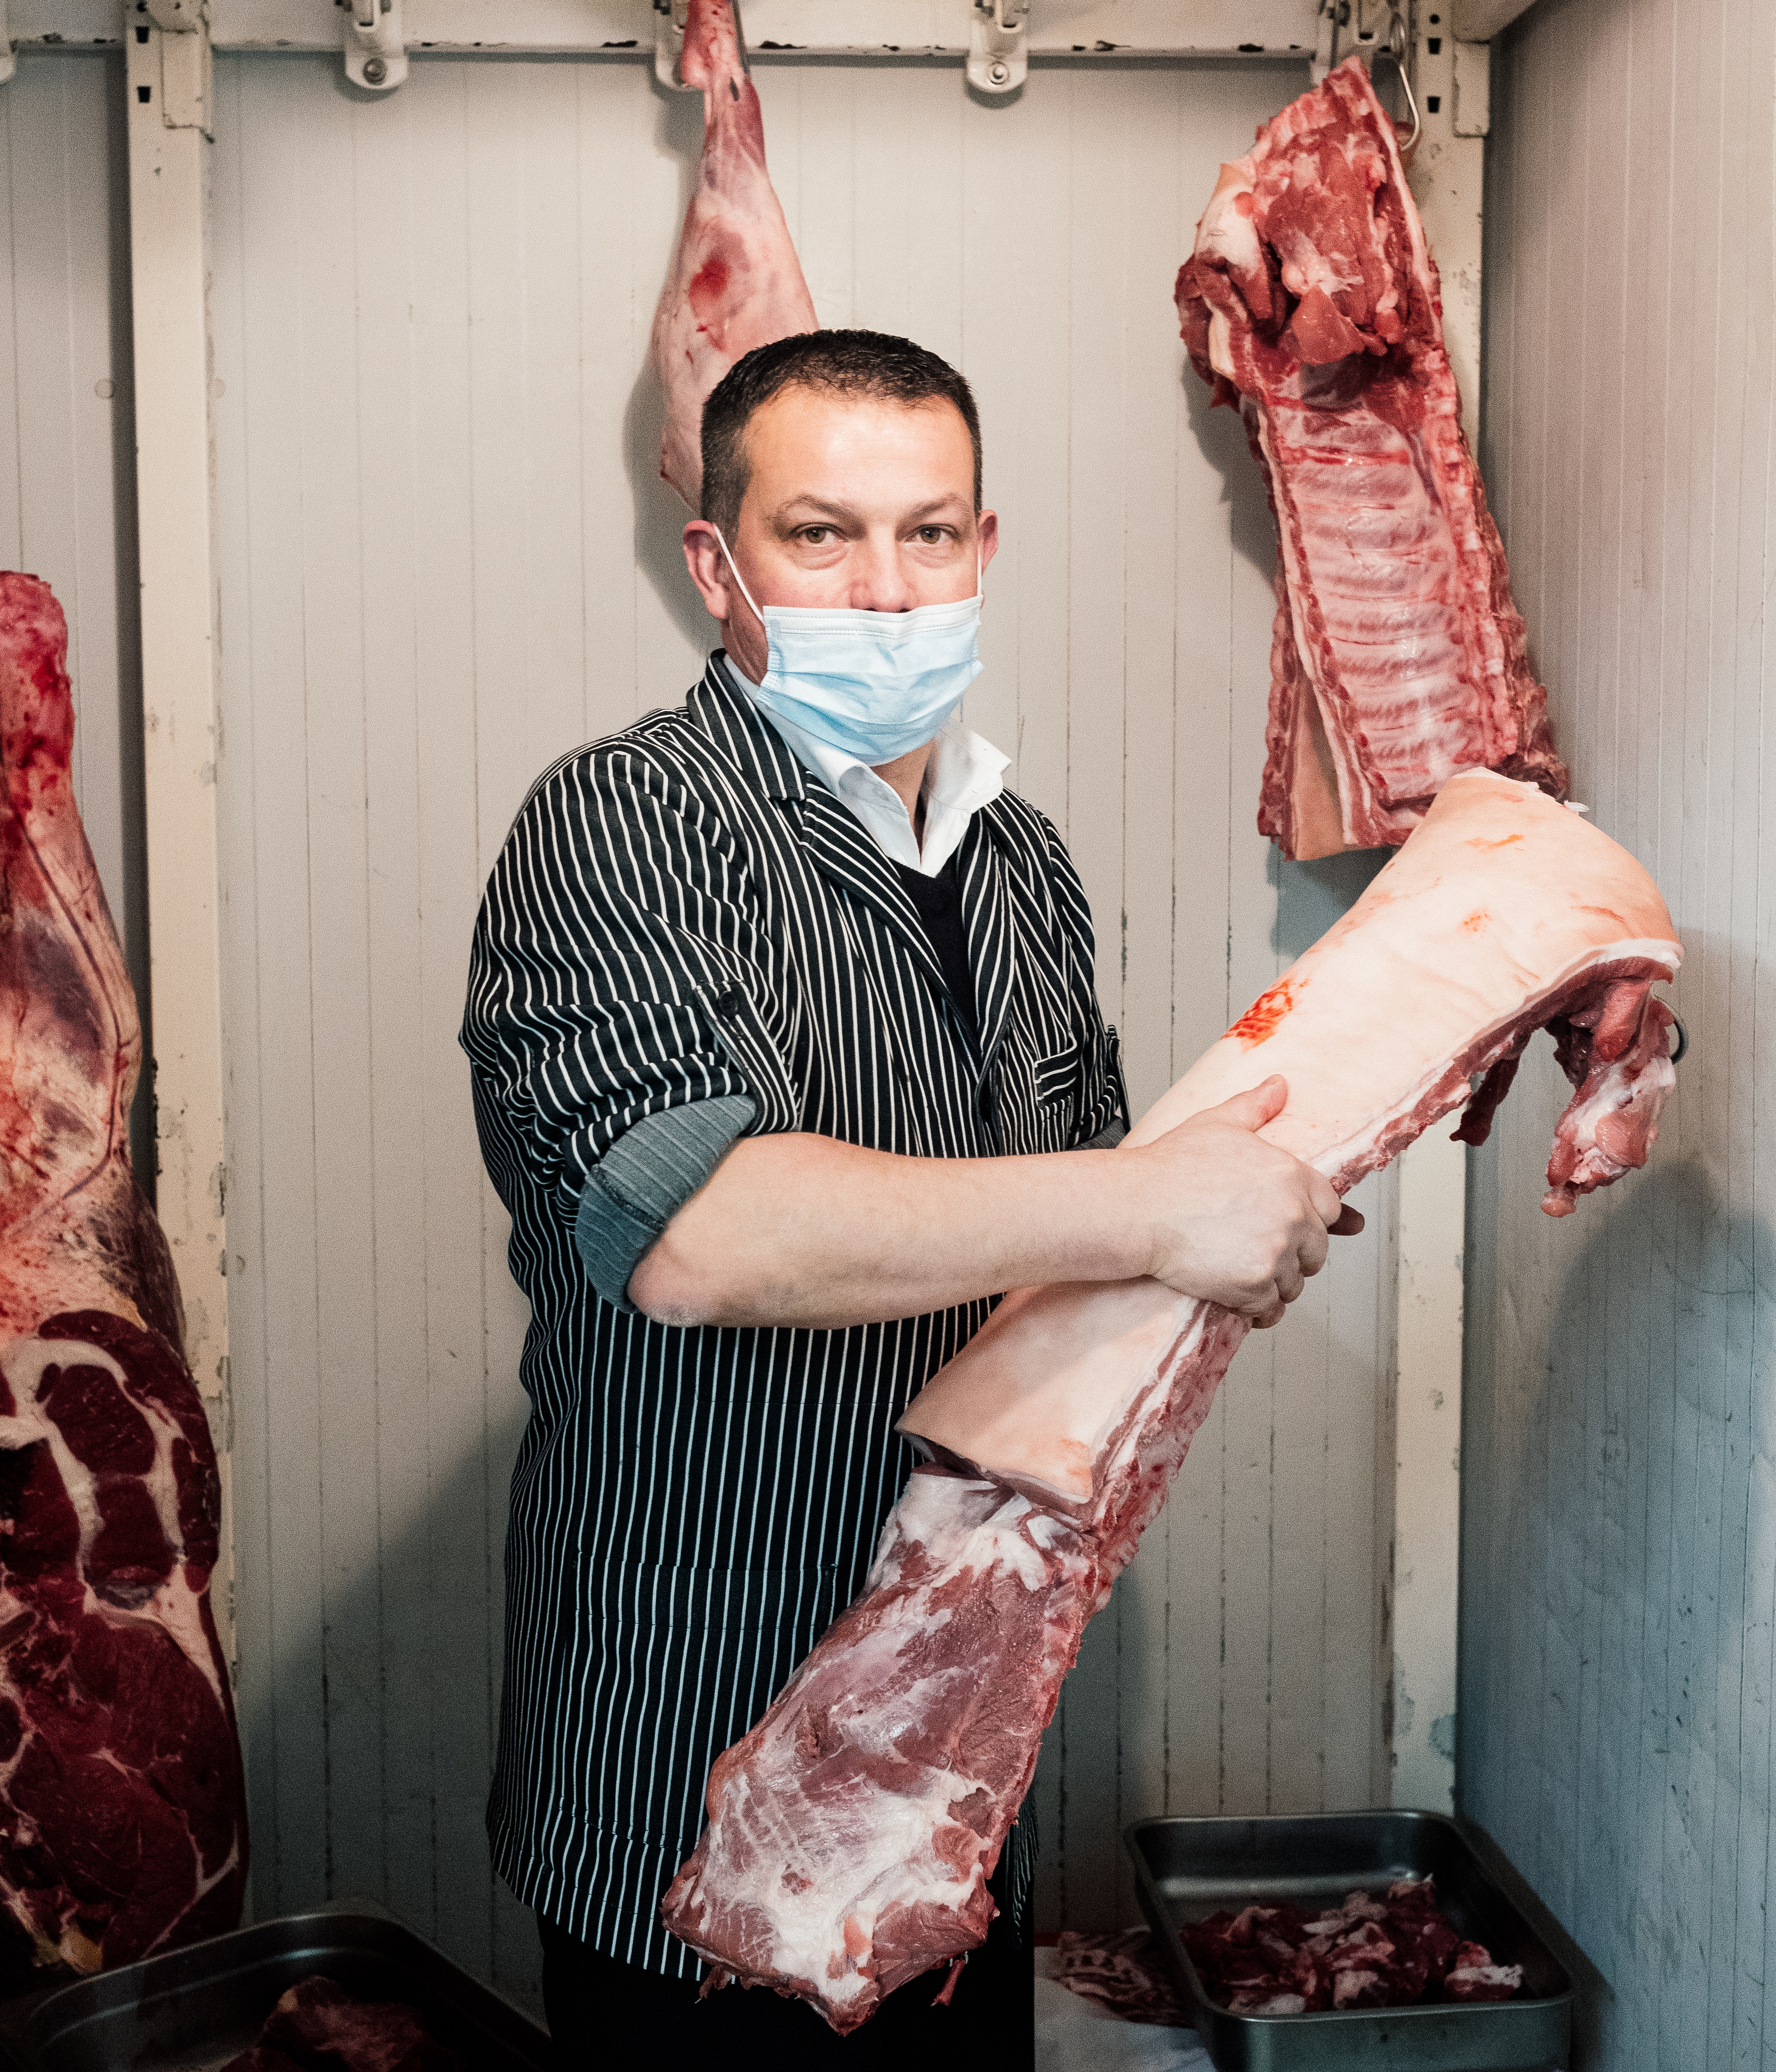 Sébastien Freteau wearing a black and white pinstripe shirt and a mask, handling a large piece of pork meat.